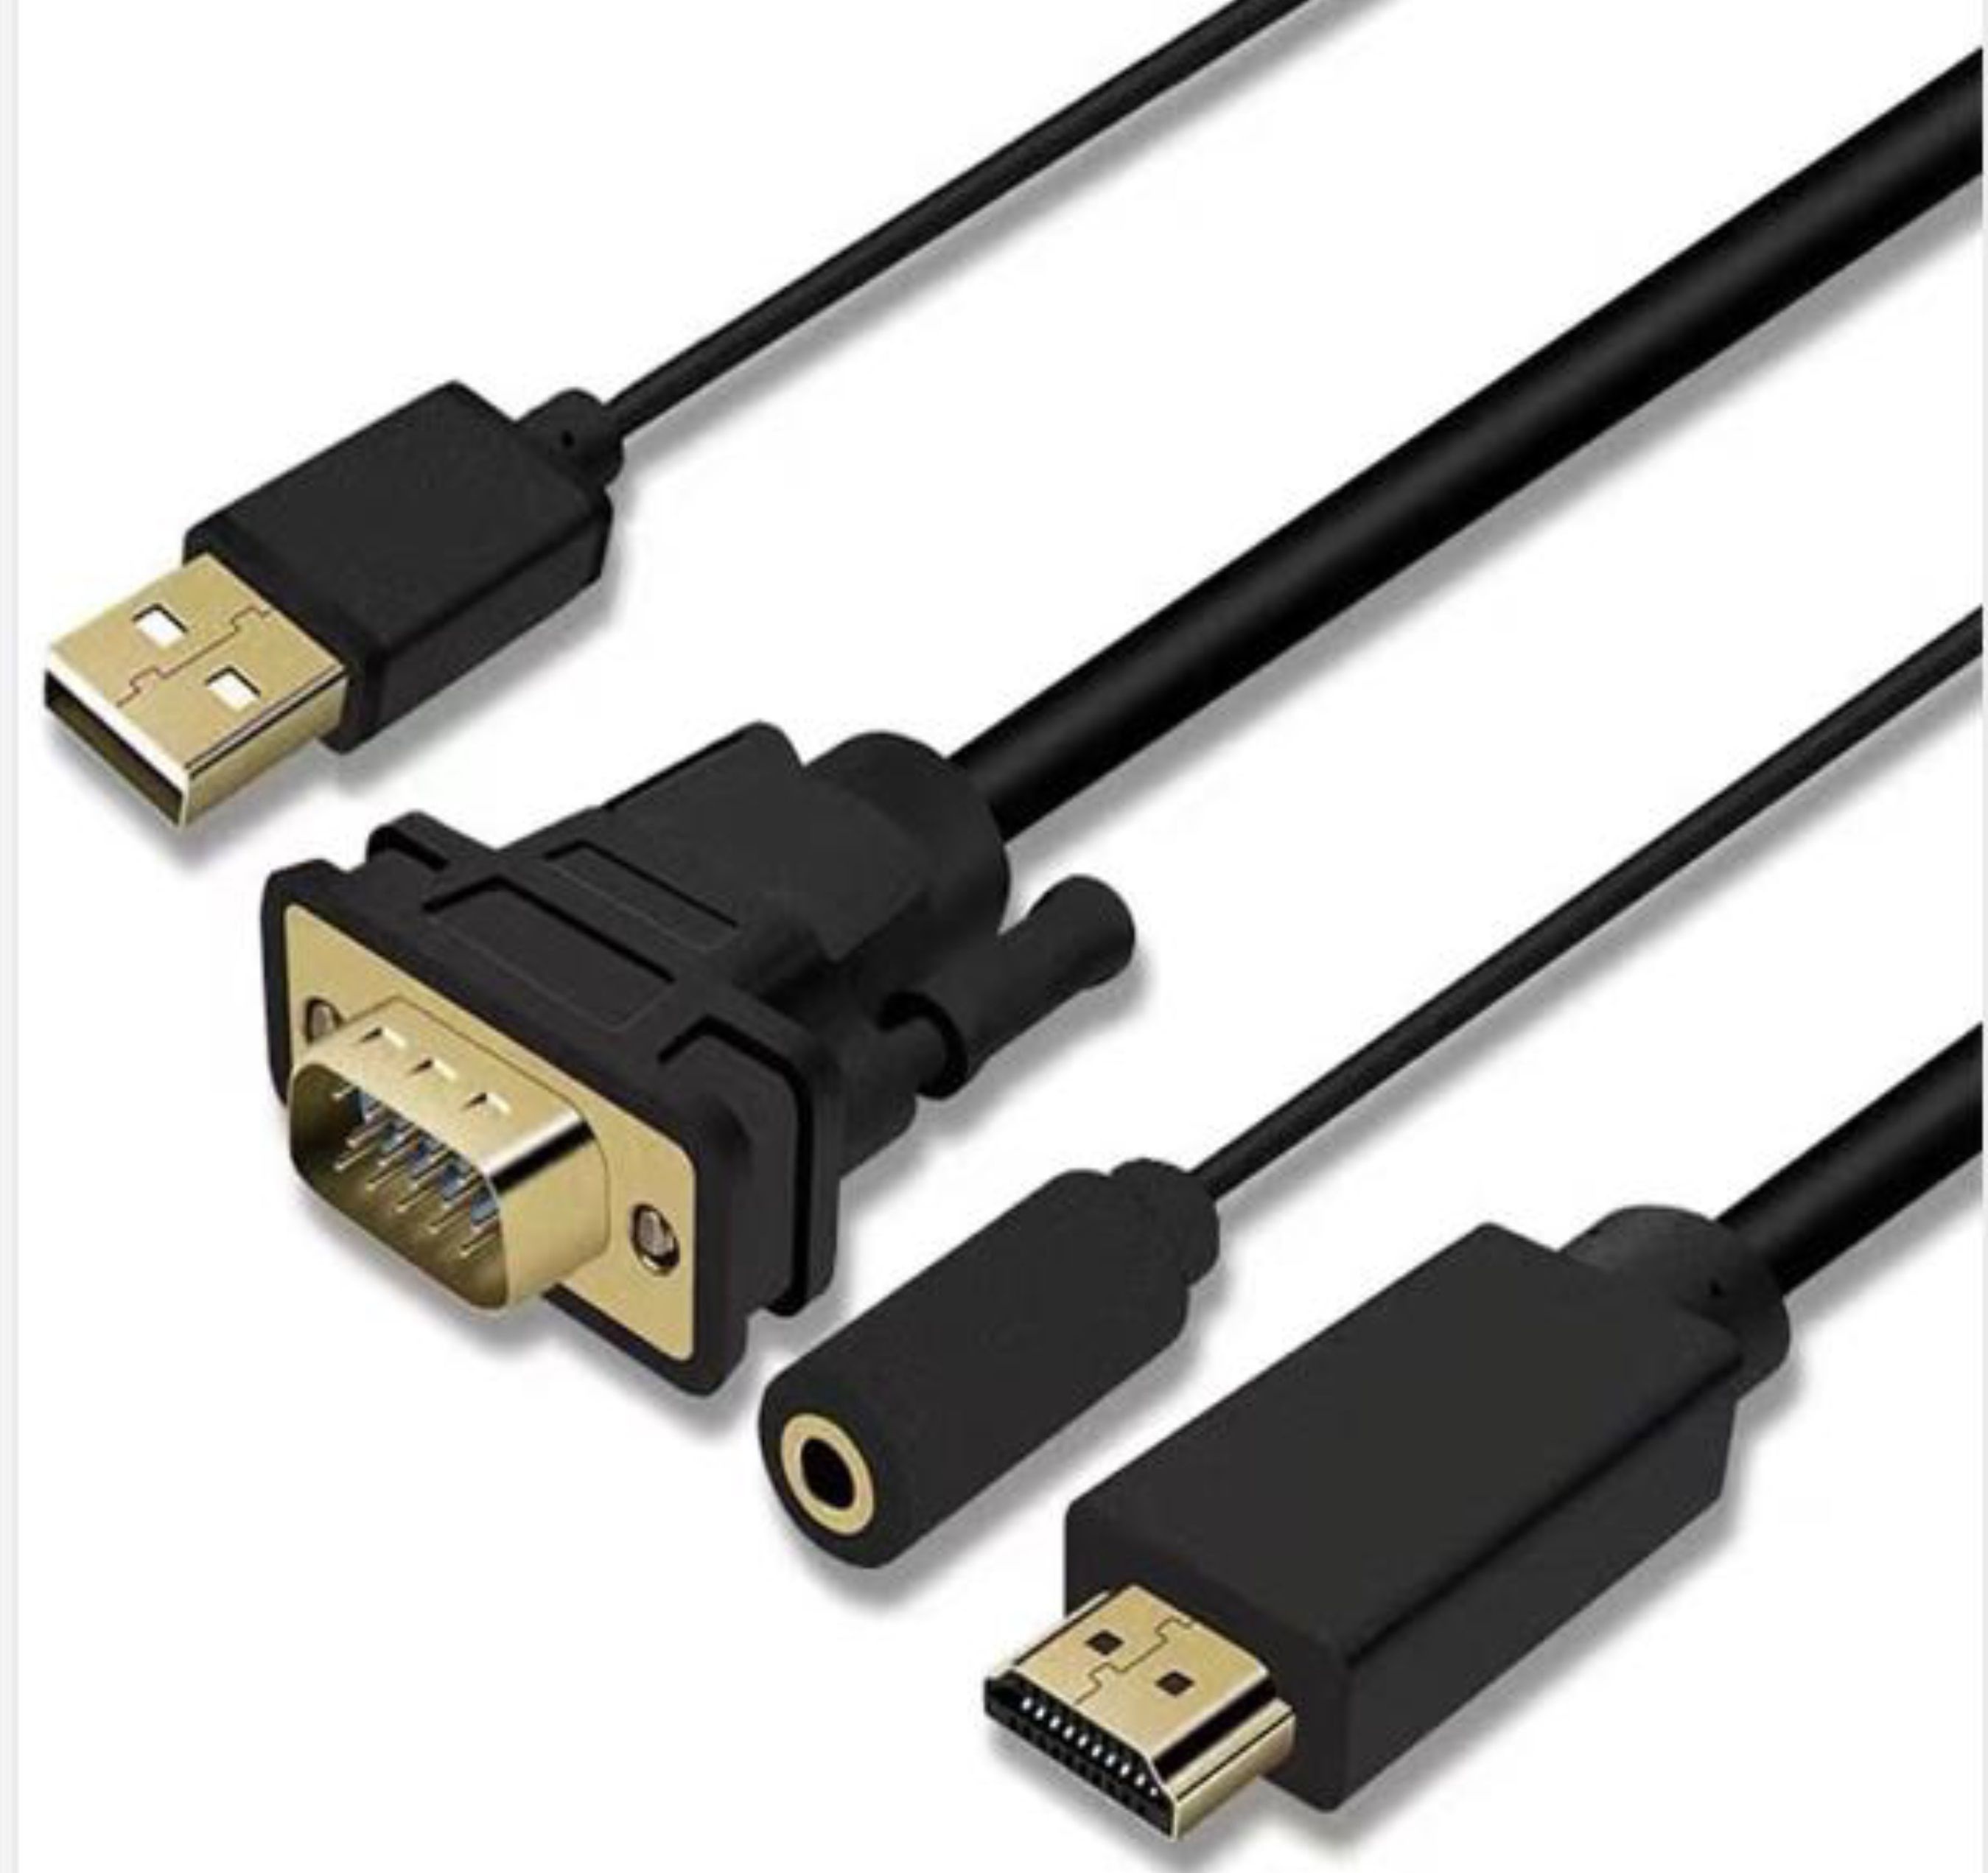 HDMI to VGA cable with integrated audio (female) - 1 meter